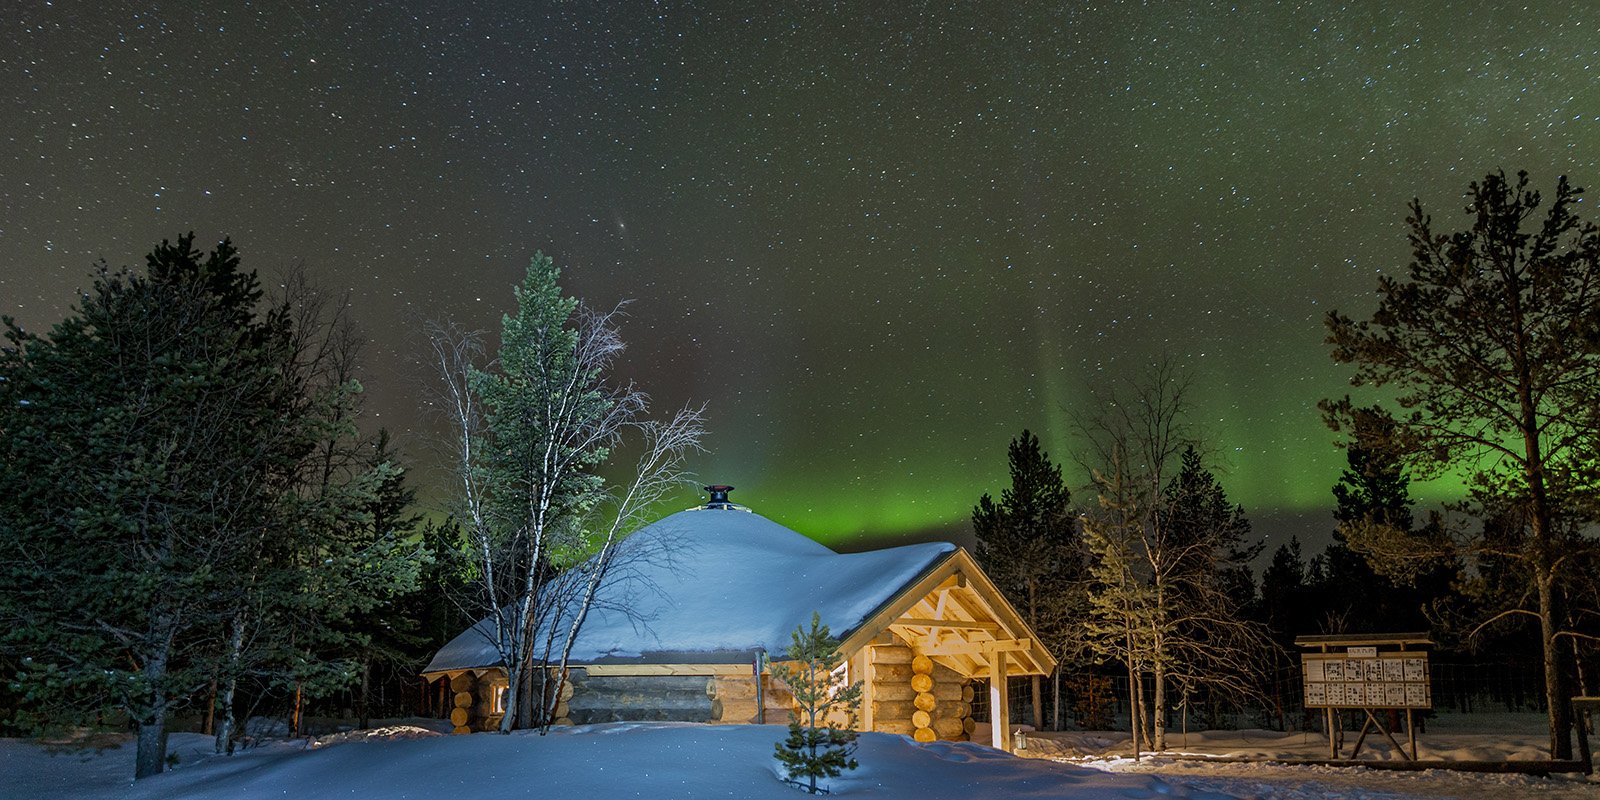 Snow-covered Grillkota BBQ hut in Arctic Finland with Northern Lights seen in the background